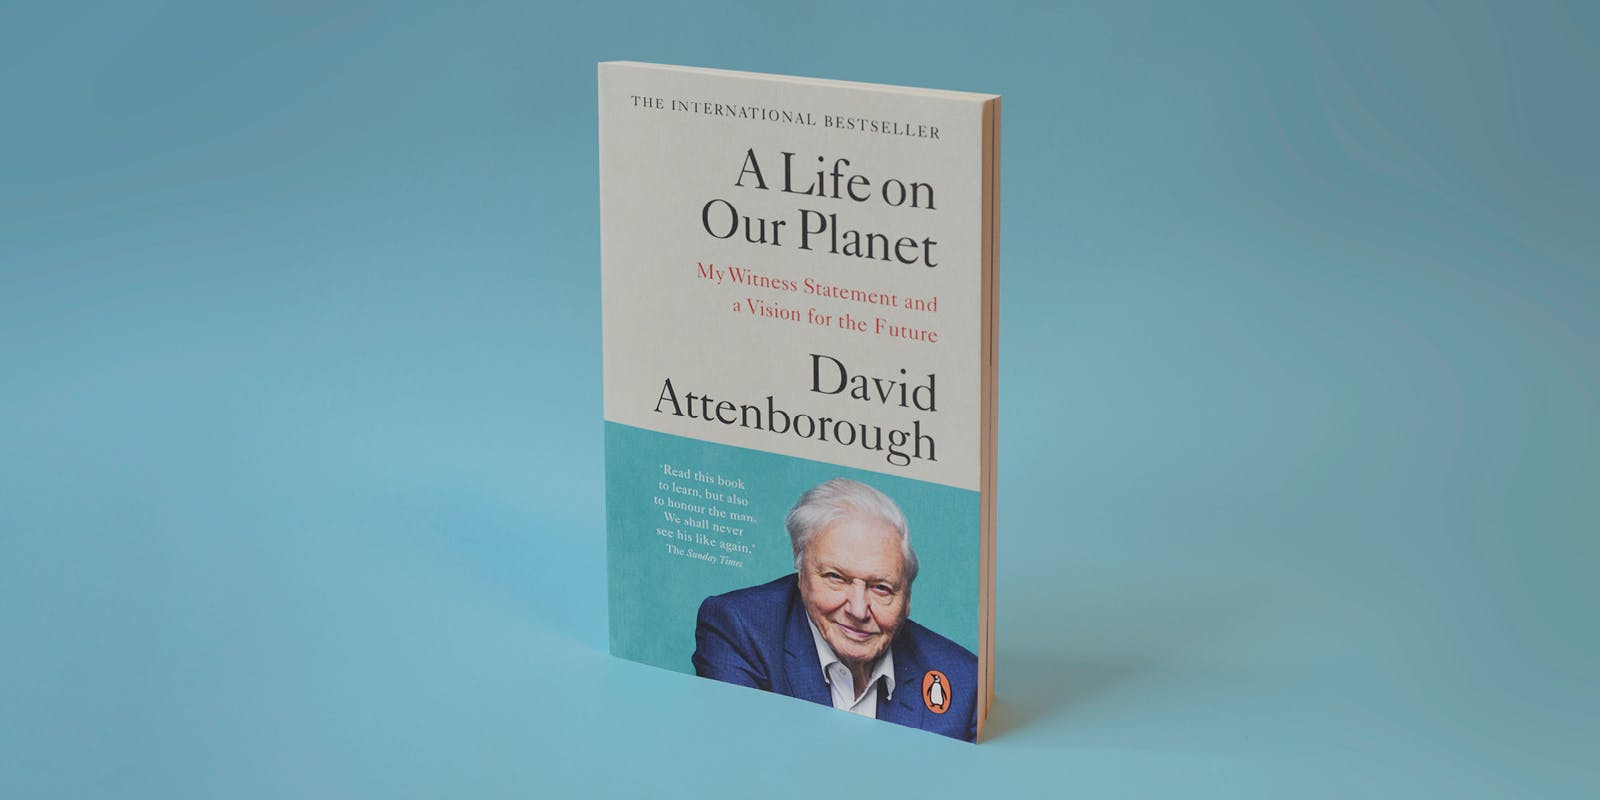 Everything you need to know about David Attenborough